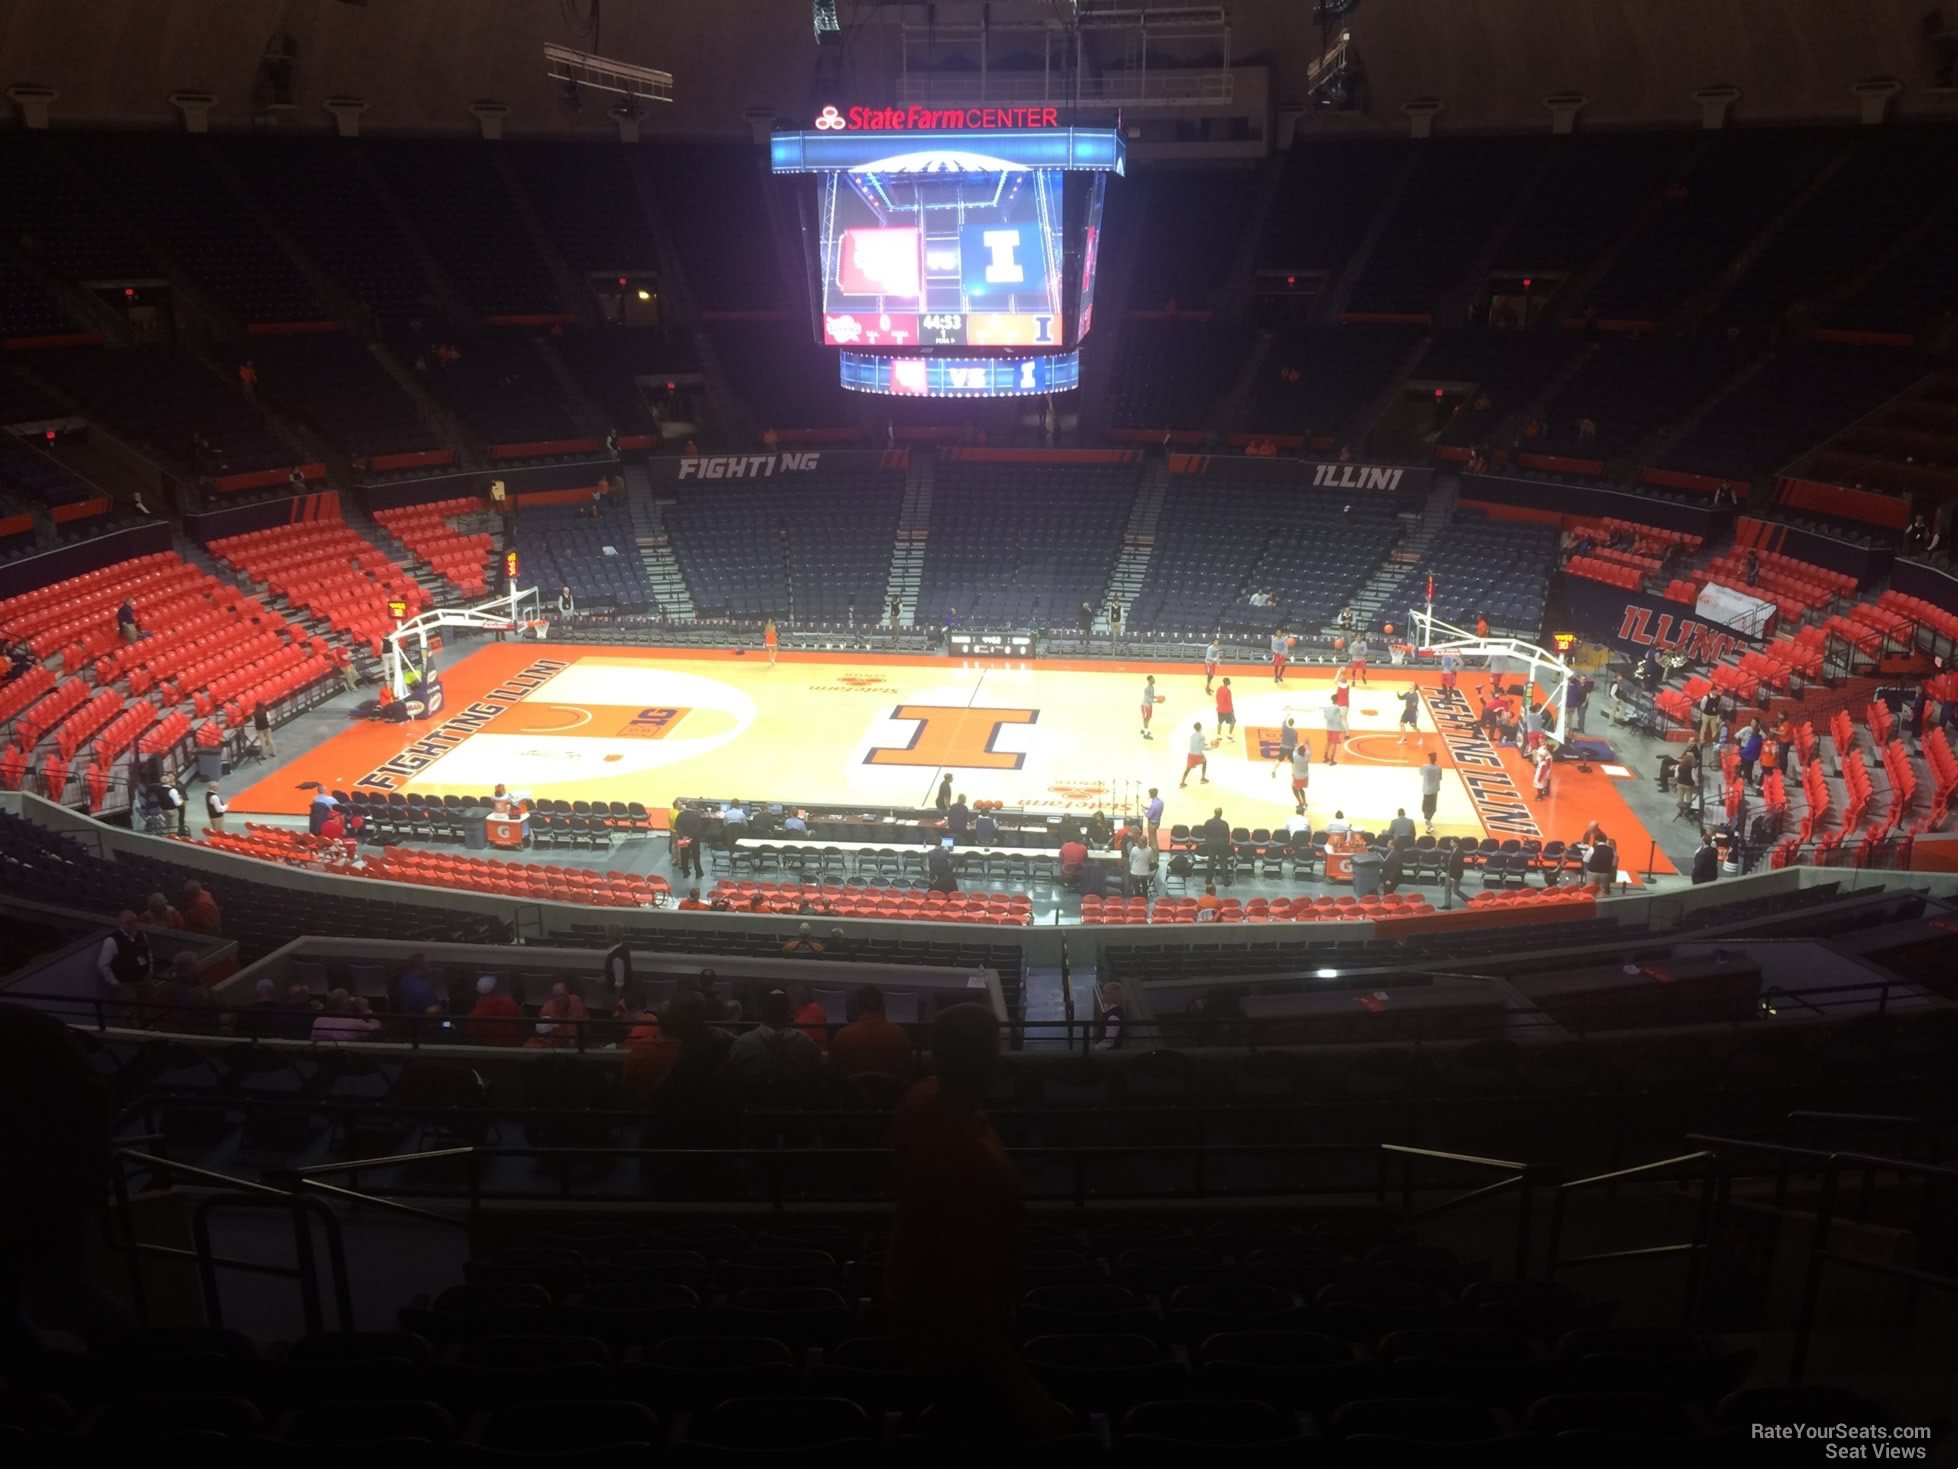 section 224, row 10 seat view  - state farm center